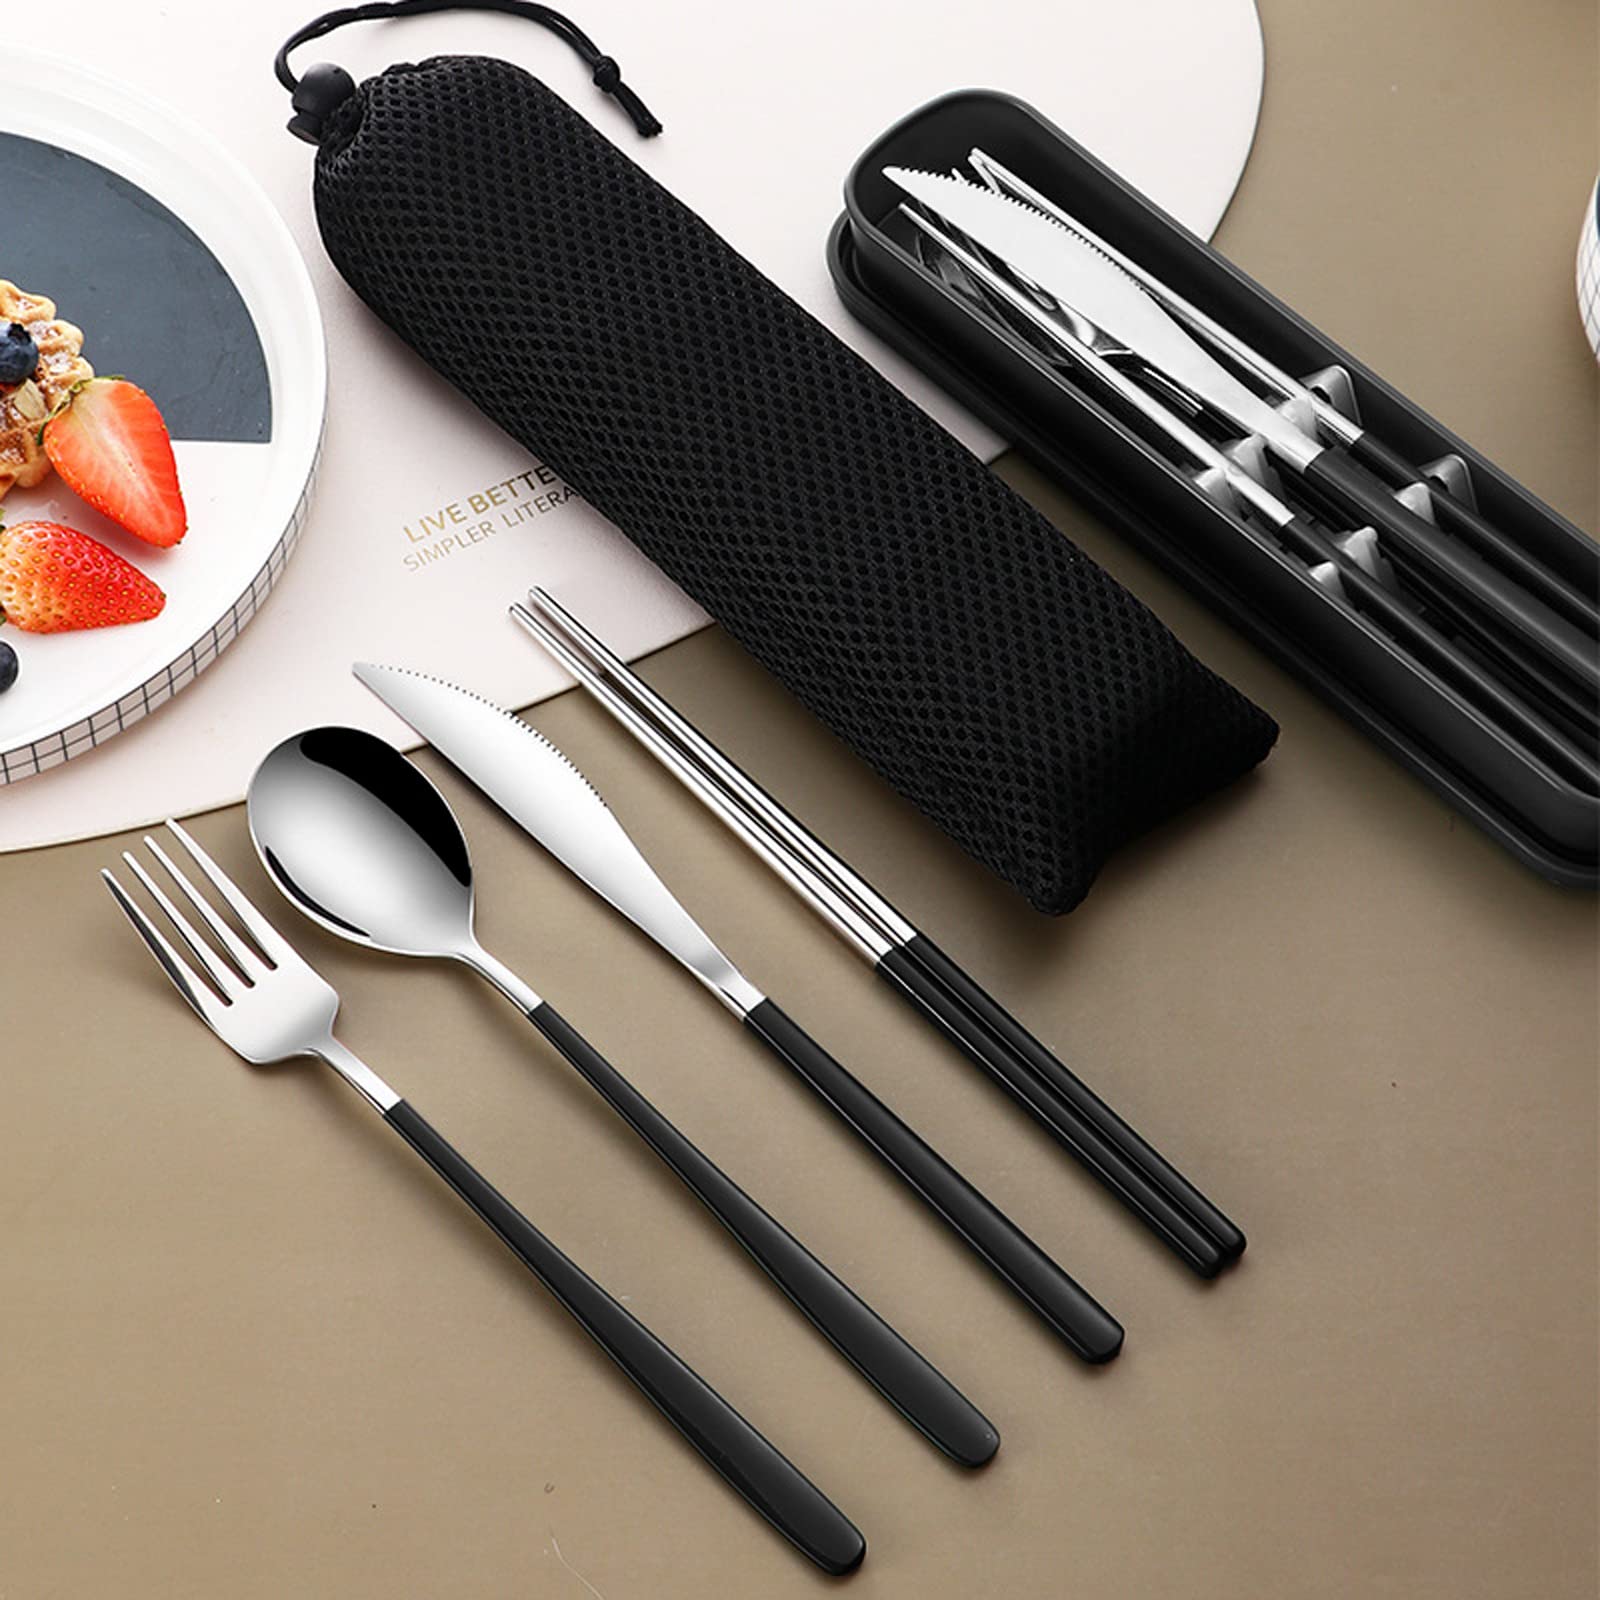 VANRA 4-Piece Portable Travel Utensils Set with Case 18/8 Stainless Steel Flatware Set Reusable Cutlery Set with Fork Spoon Knife Chopstick for Lunch Travel Camping School Work Picnic (Black)